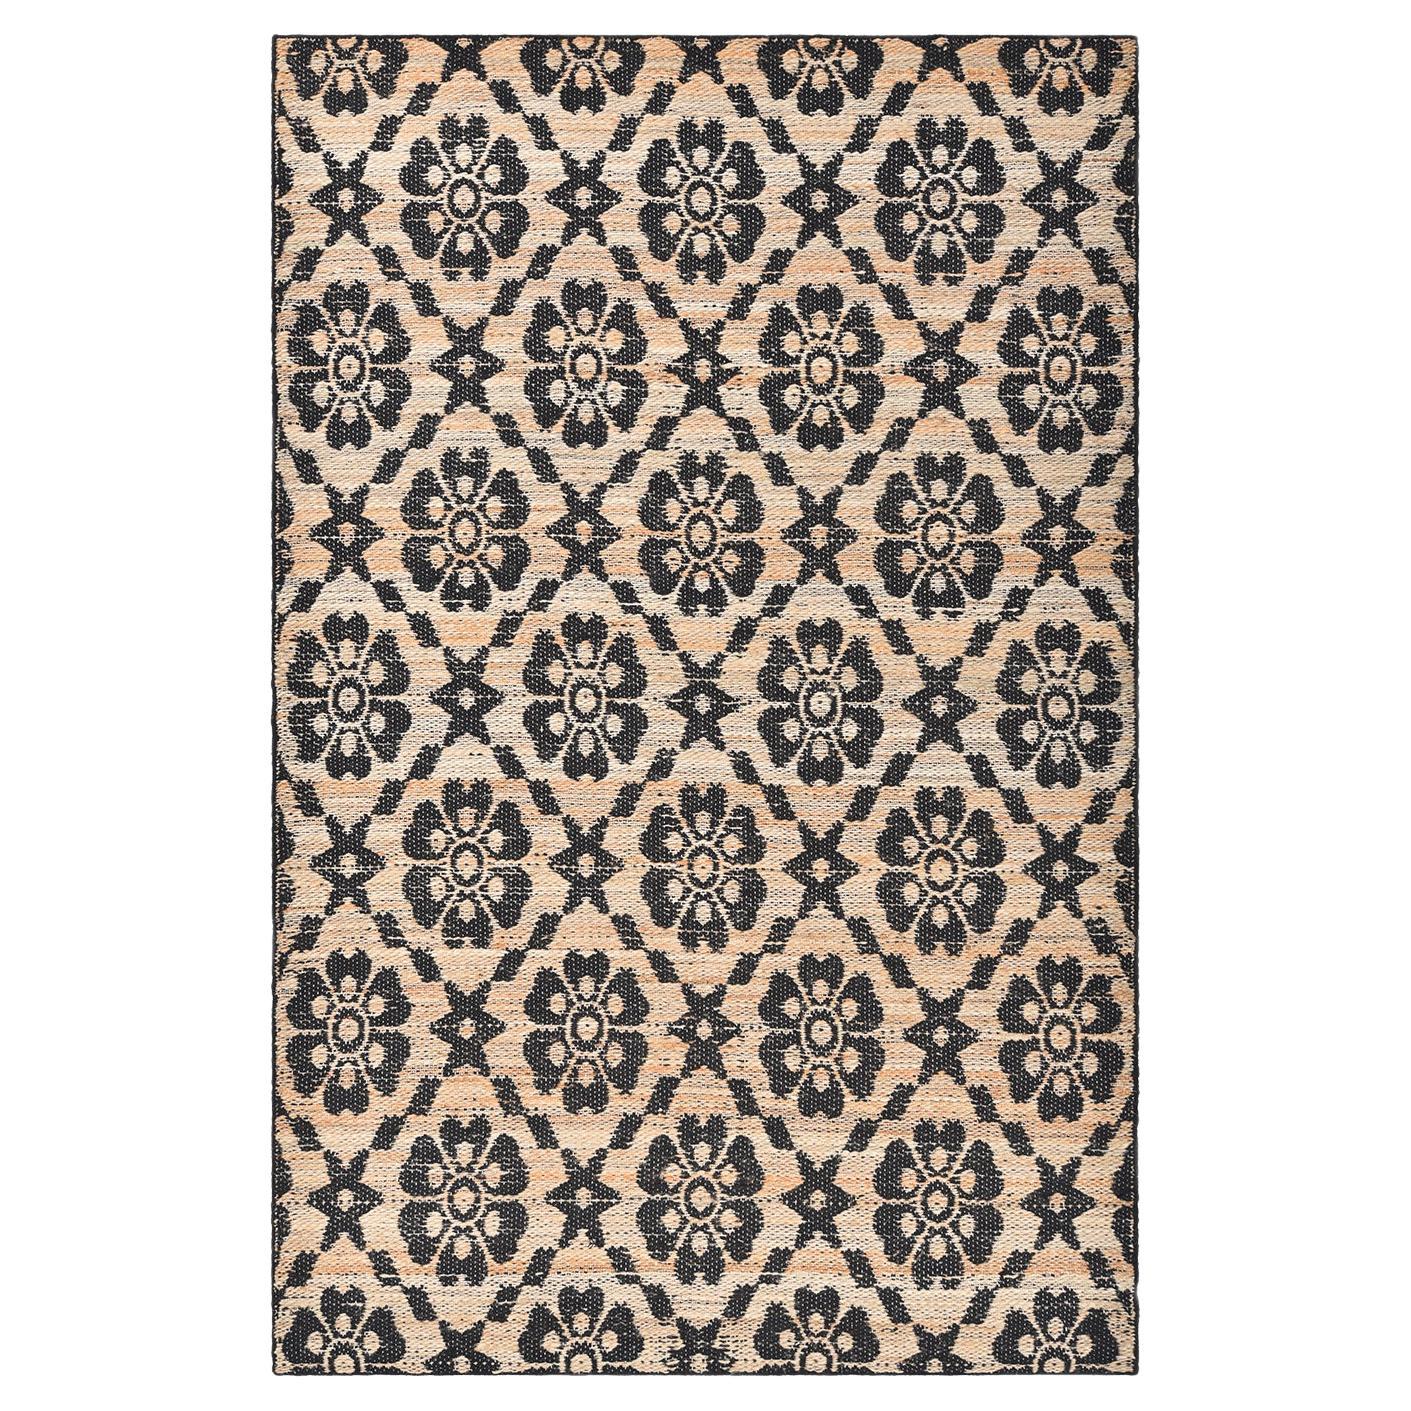 Solo Rugs Transitional Jute Floral Hand Woven Brown Runner Area Rug